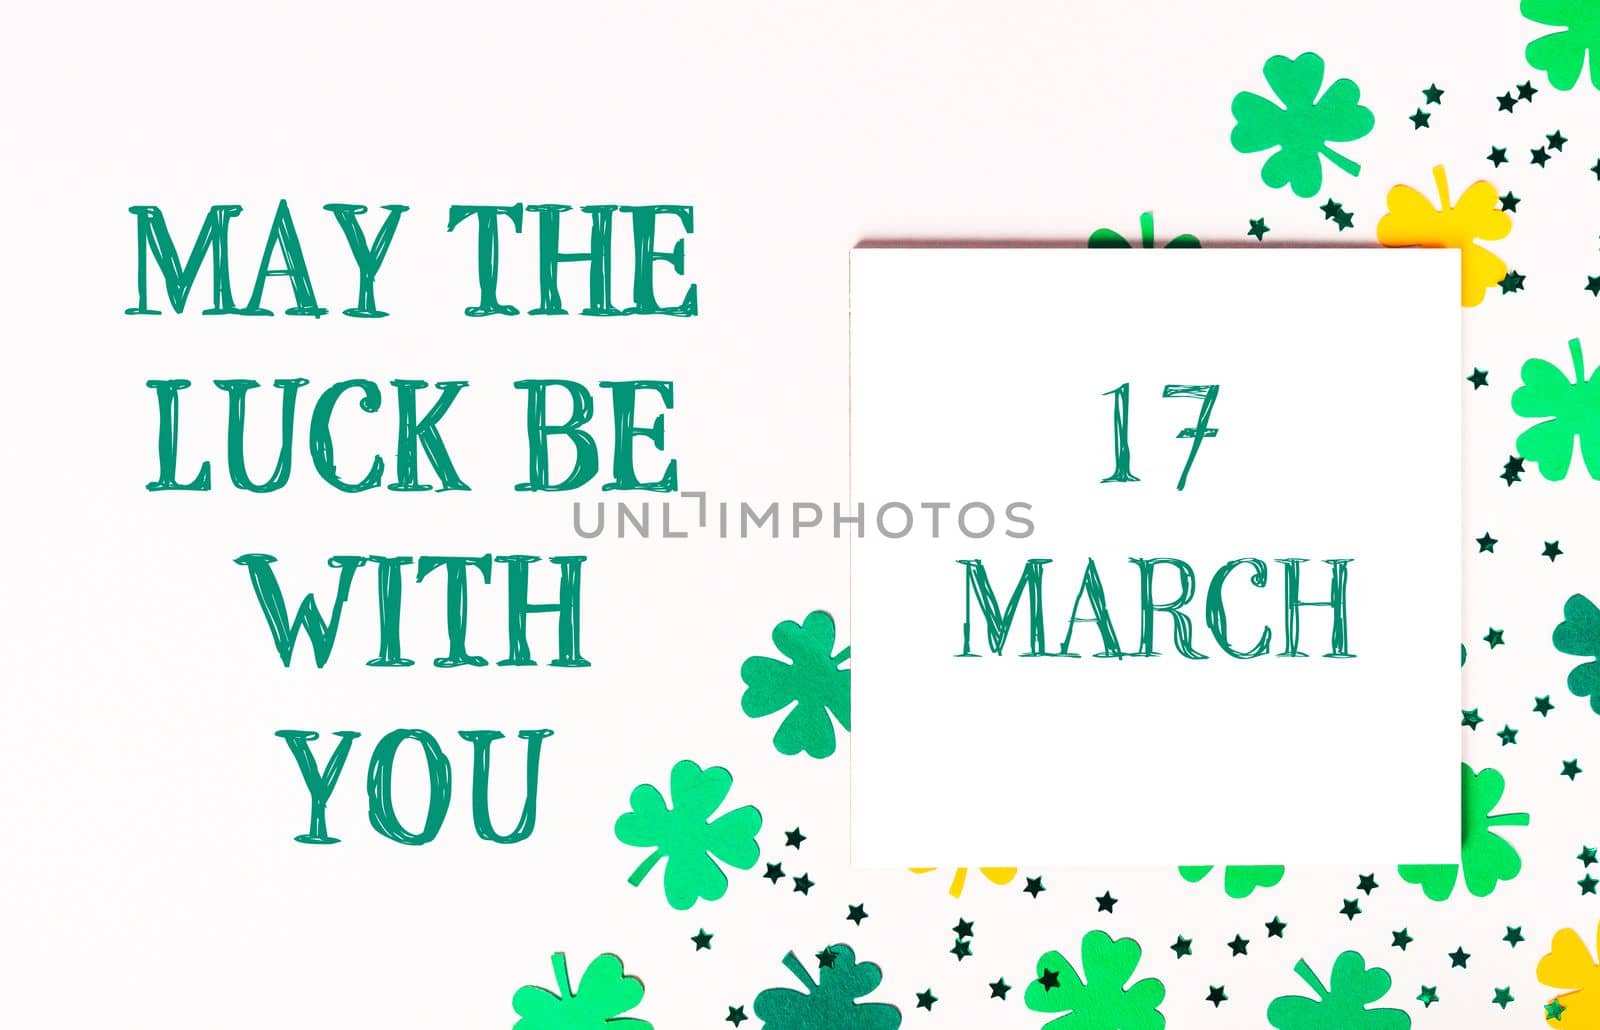 May The Luck Be With You. Composition for St. Patrick's Day. Congratulatory white card calendar with clover on a white background. Top view, lie flat, copy space